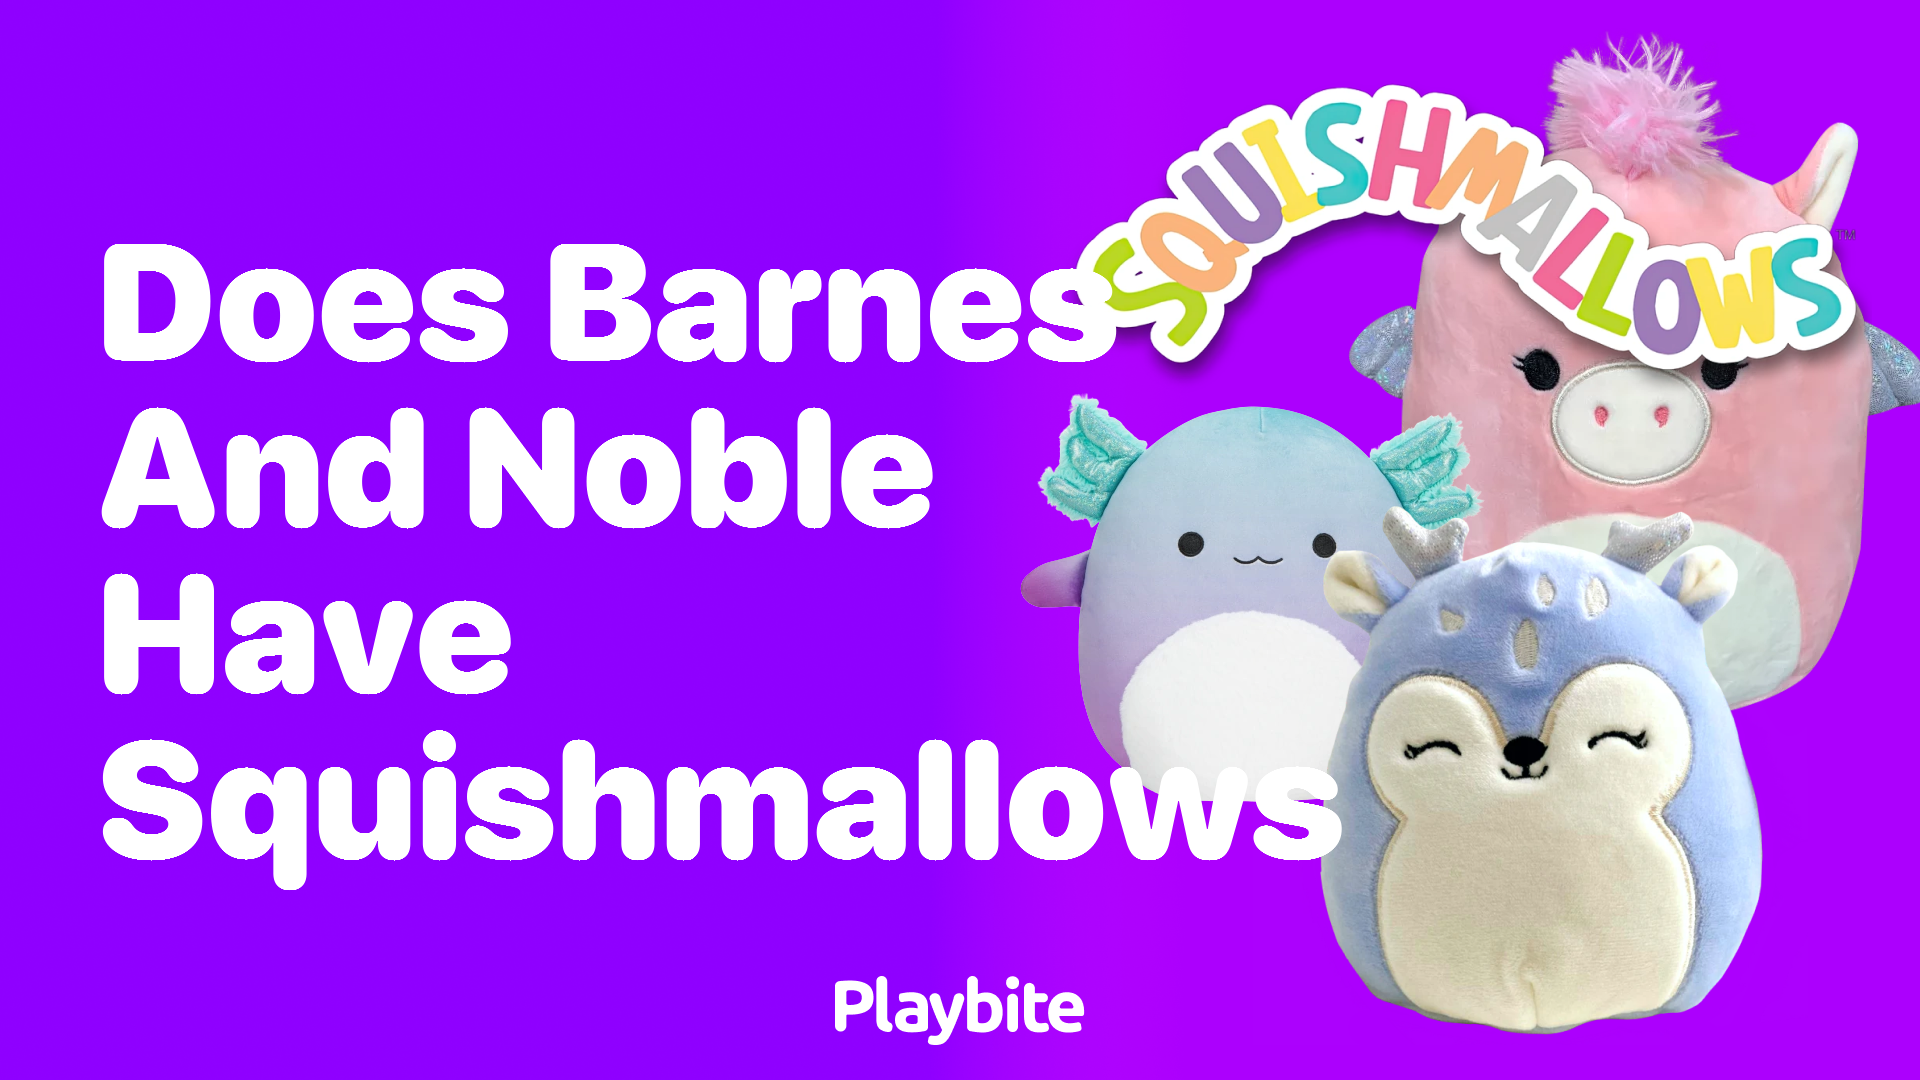 Does Barnes and Noble Have Squishmallows?